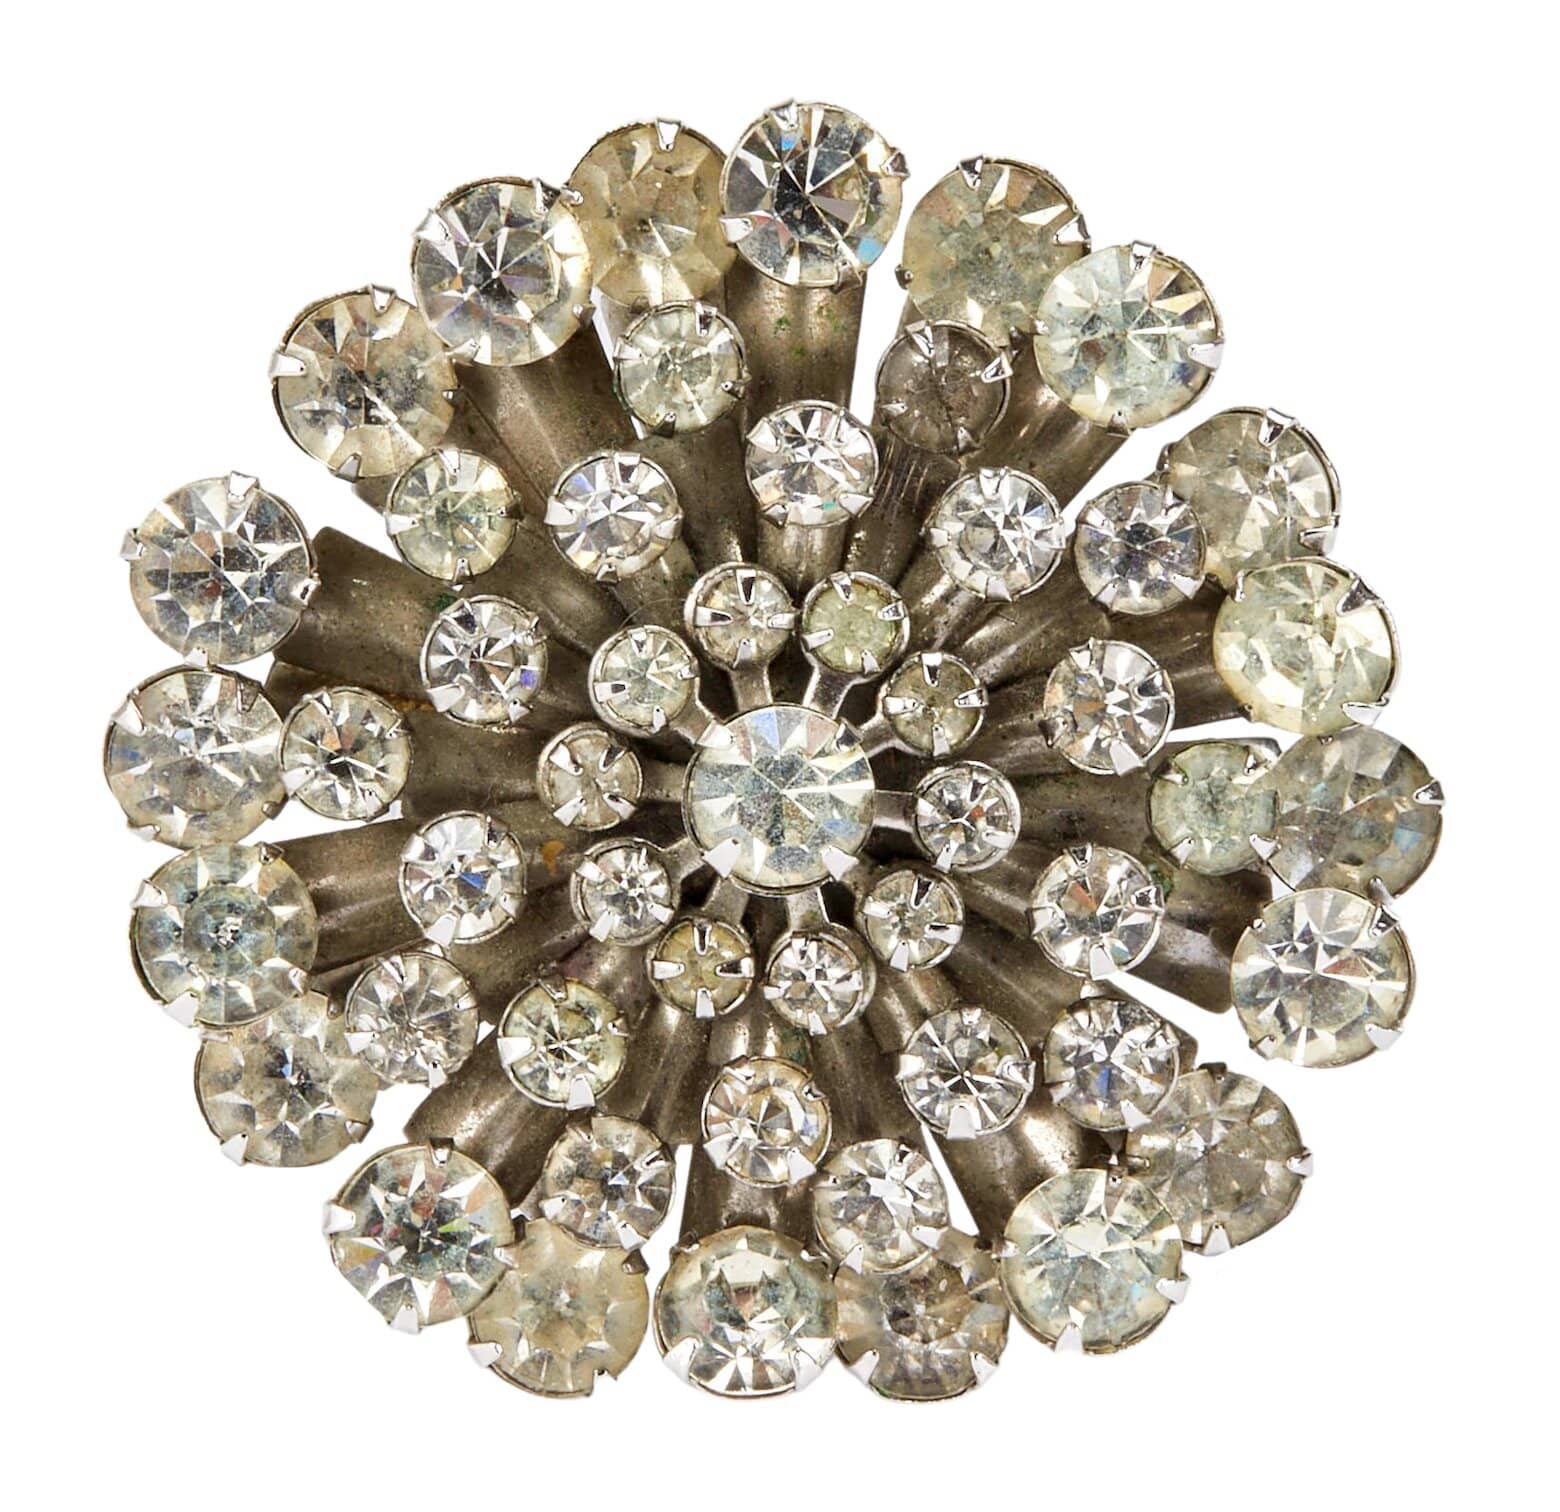 The actress’ floret-styled brooch of simulated diamonds